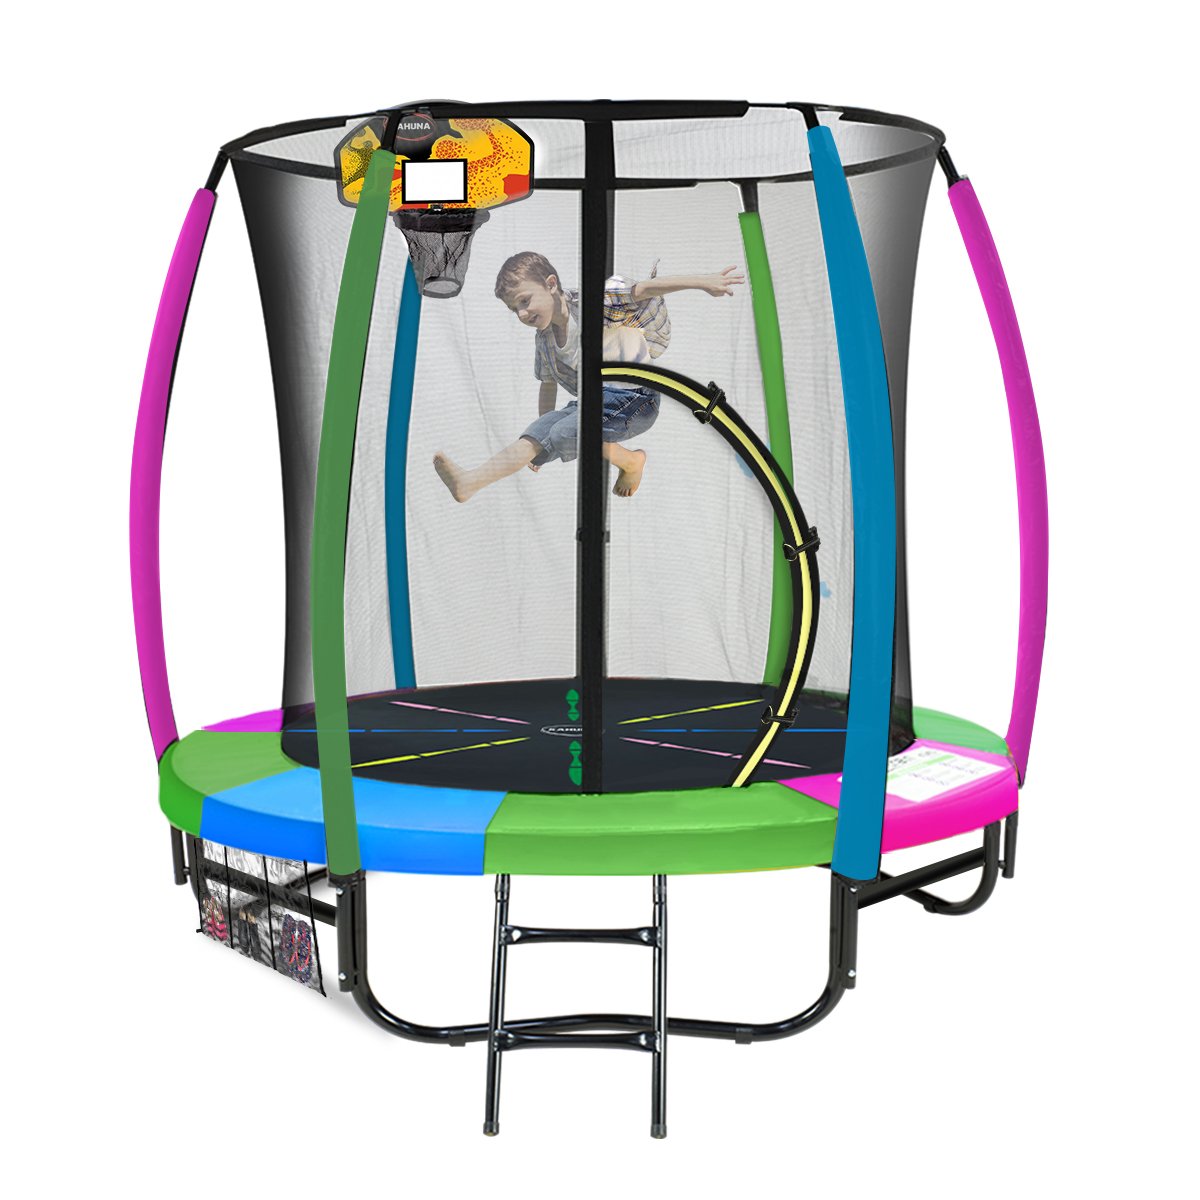 Kahuna Classic 6ft Trampoline Free Ladder Spring Mat Net Safety Pad Cover Round Enclosure Basketball Set - Rainbow